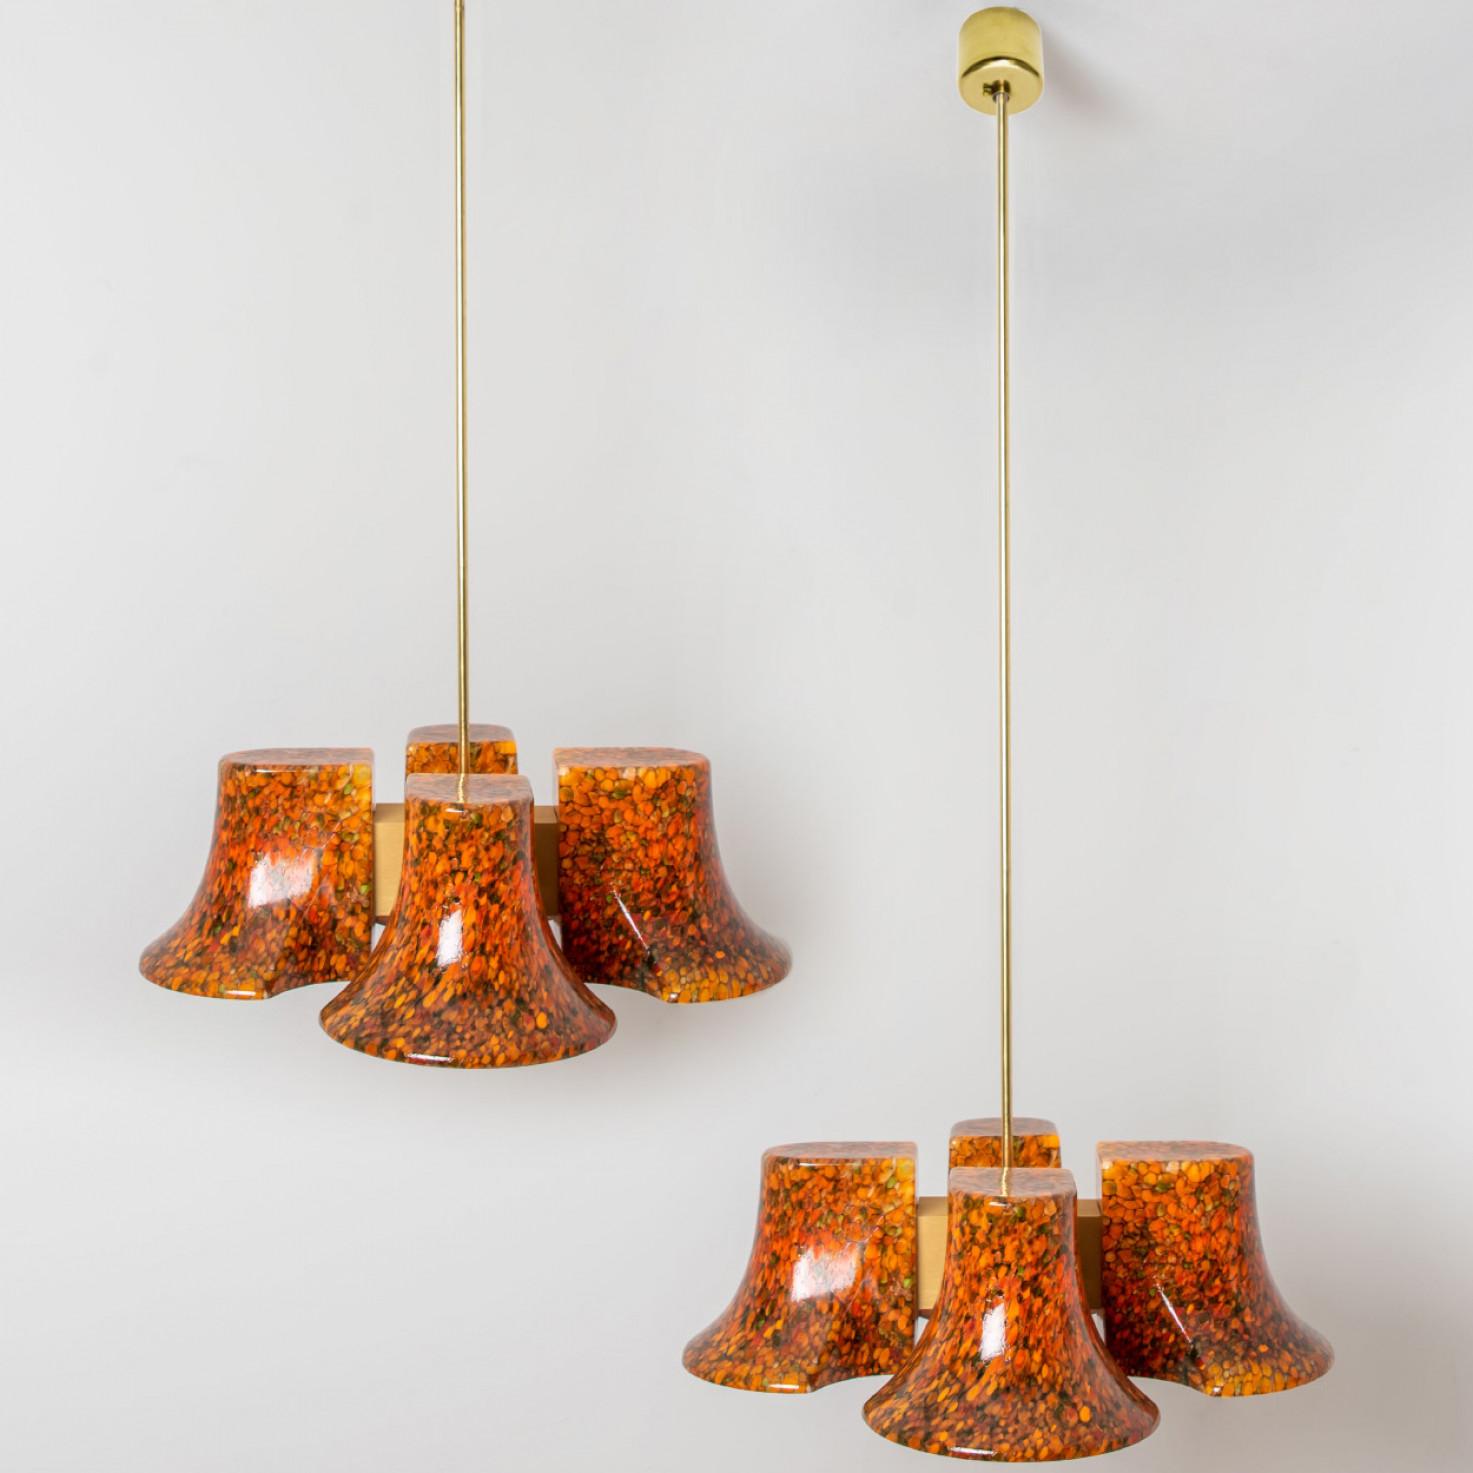 A pair of  fun and unique Hillebrand pendants made around 1970 in Europe.
The colors of the murano glass give the light a playful look. When lit, the pendant fills the room with a soft, warm color.

The pendant has a brass base and four murano glass